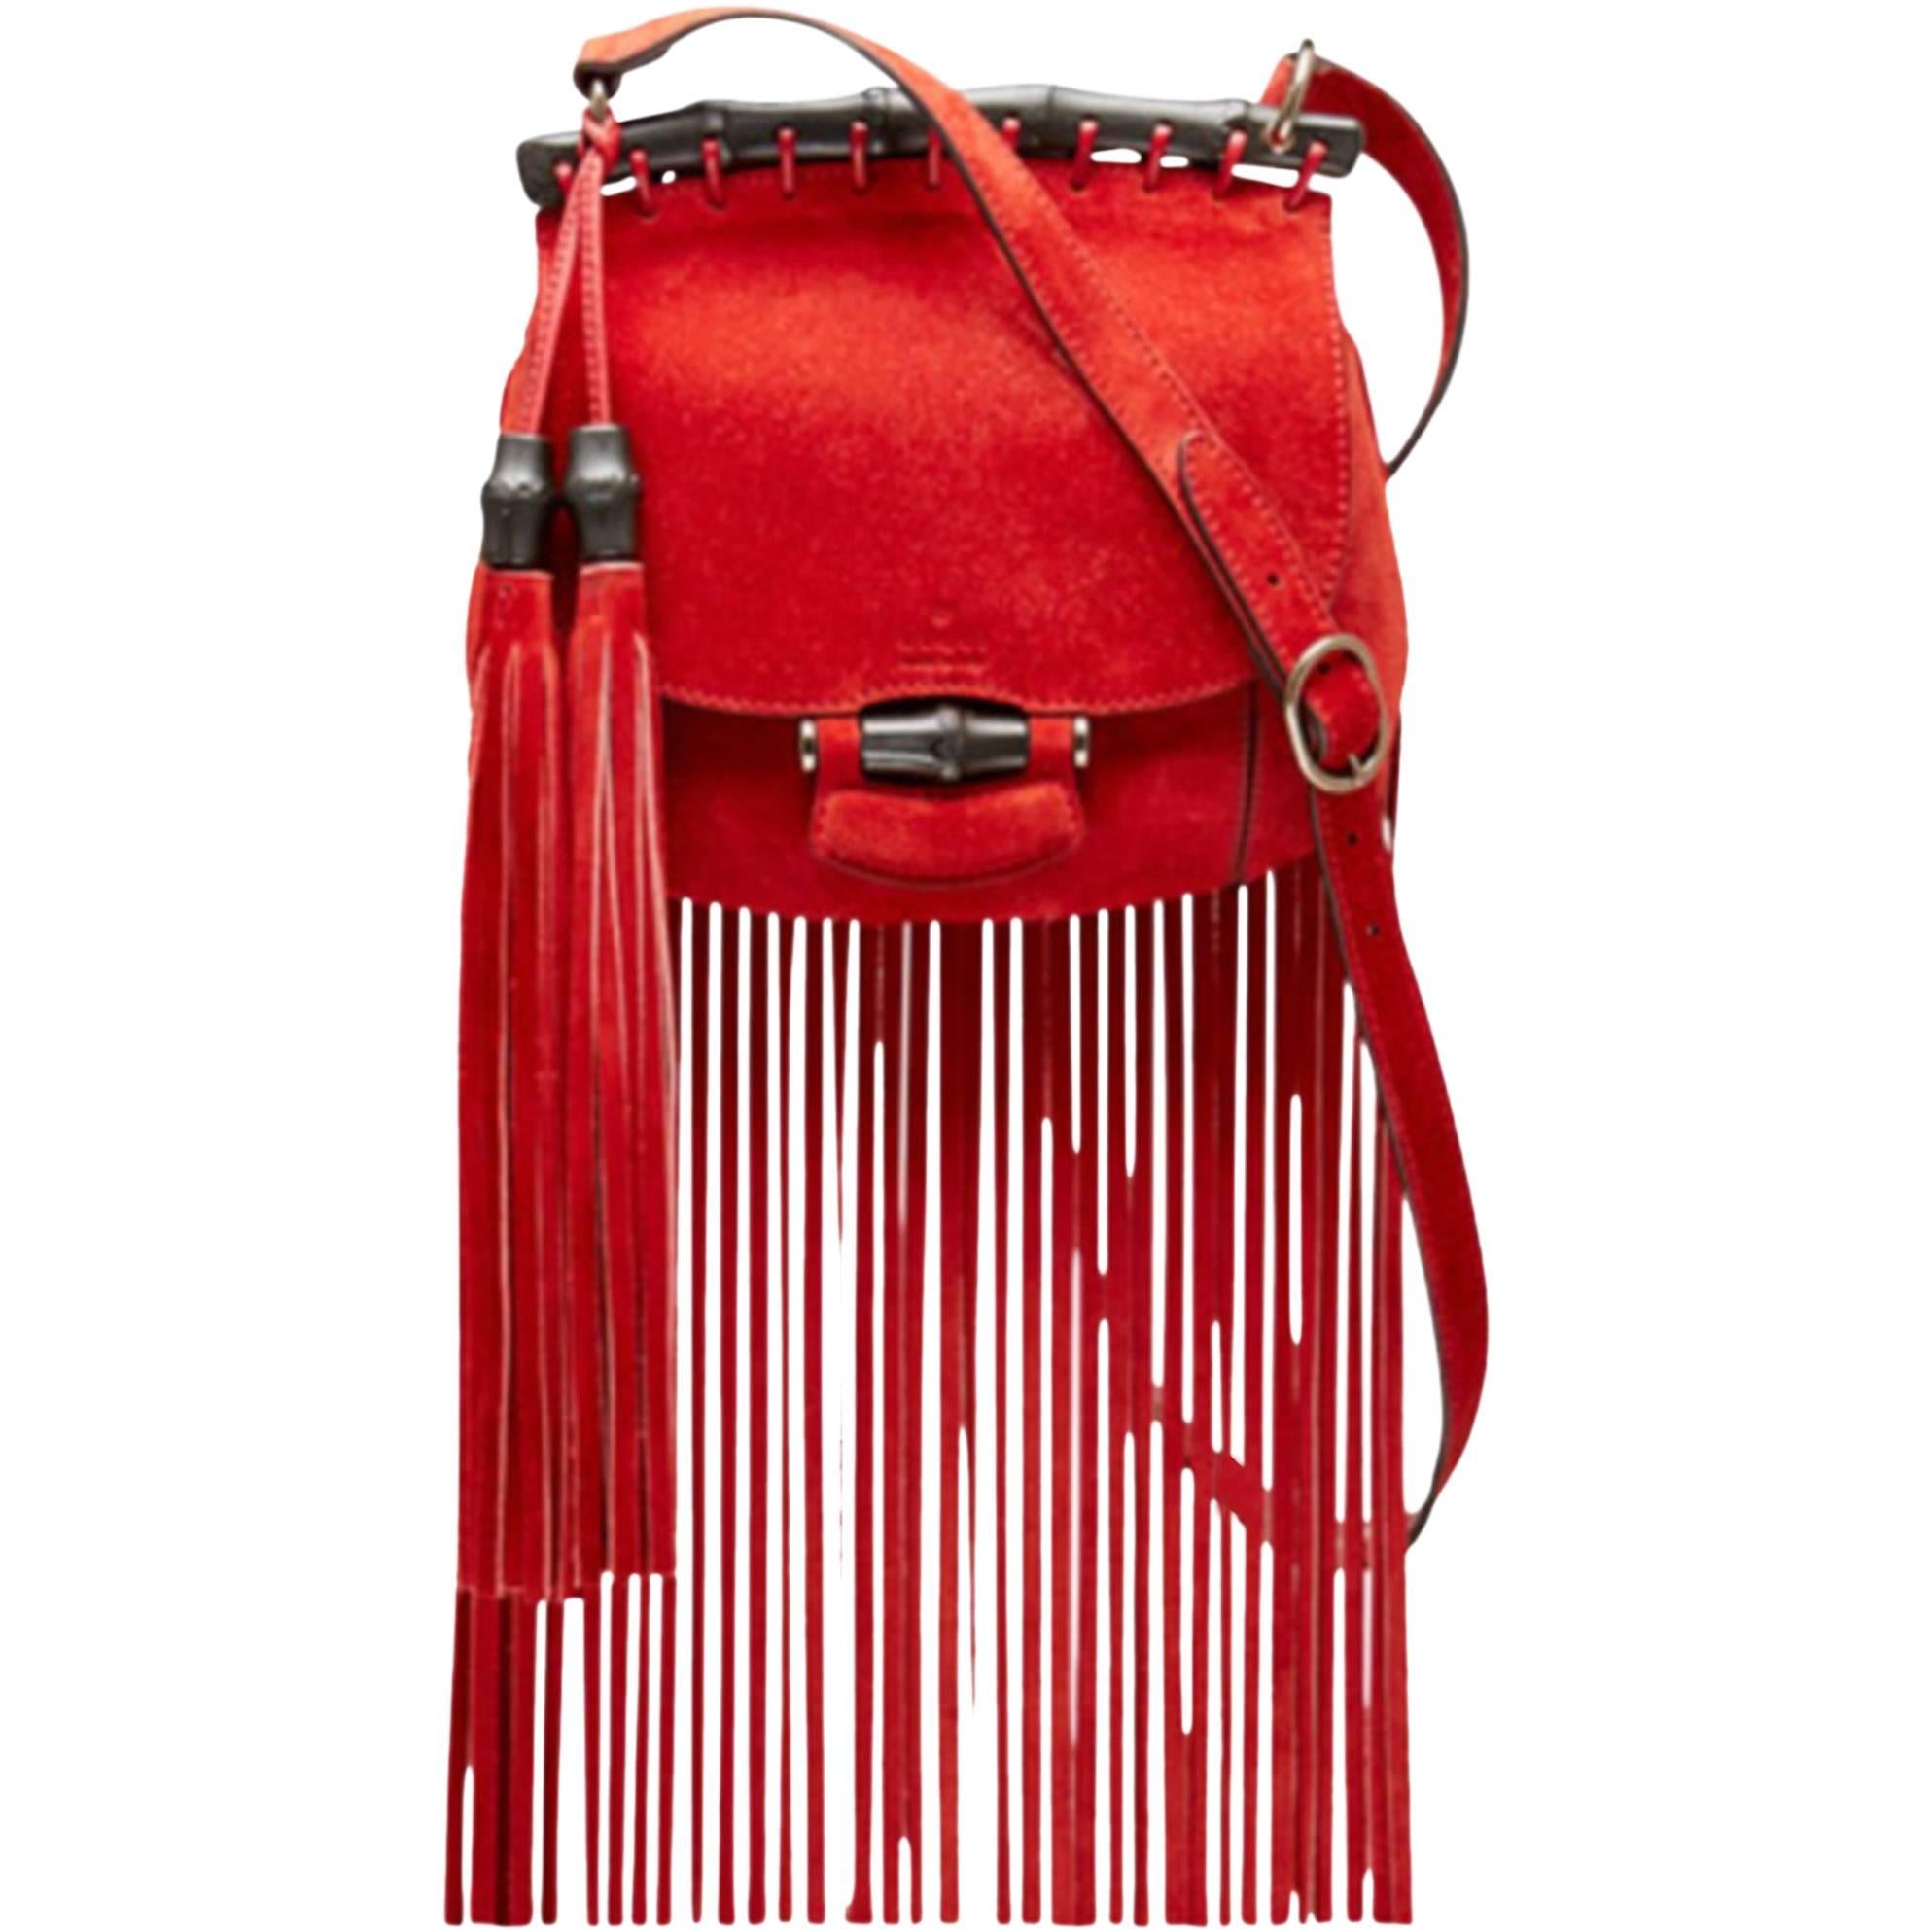 2014 Gucci Small Fringes Shoulder Bag Suede Red Leather / Good Condition